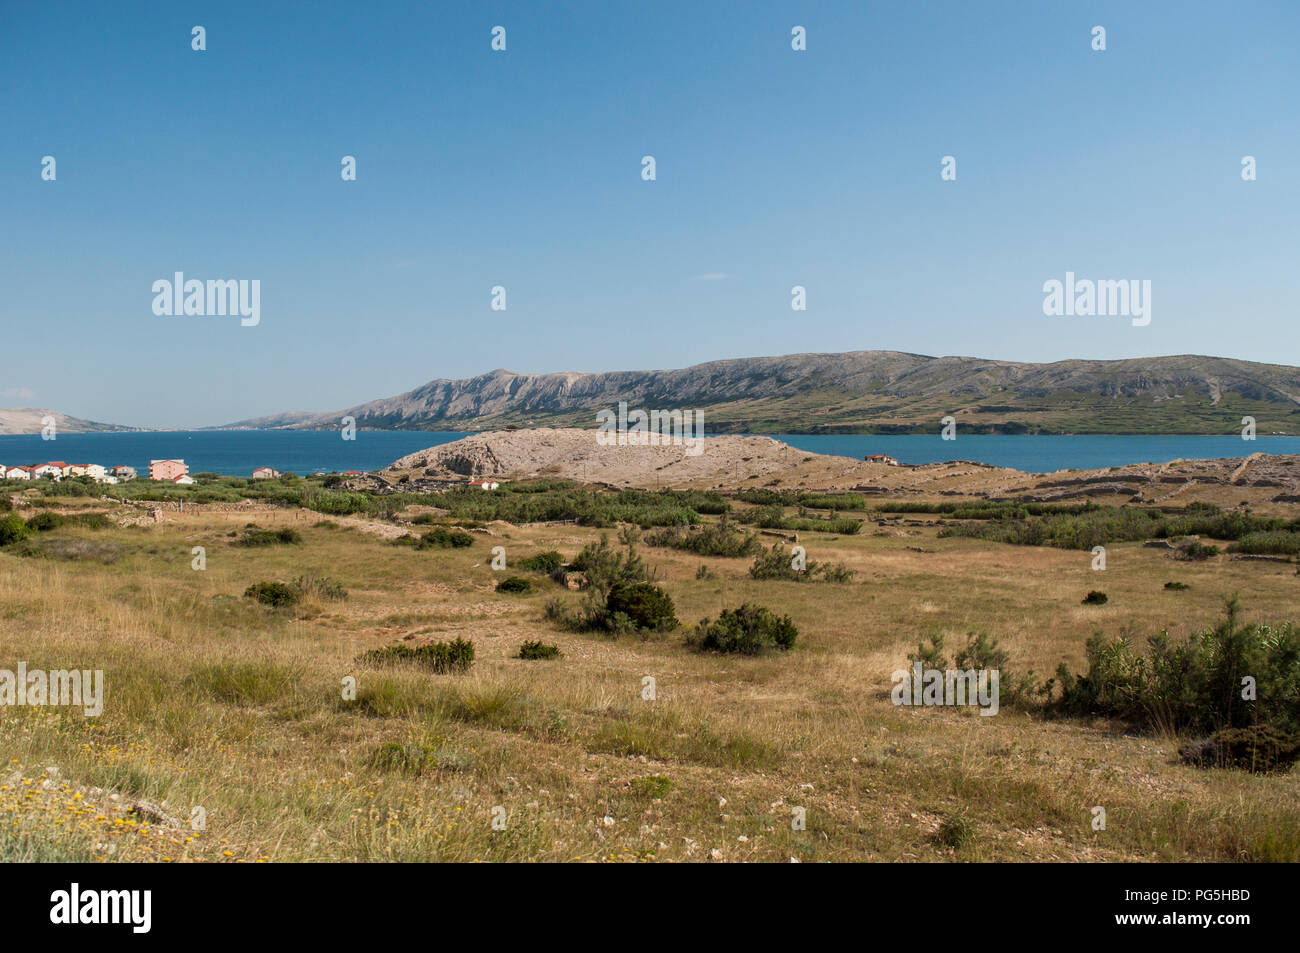 Croatia: panoramic view of the fjord and village of Metajna, a remote little village along the Bay of Pag on the Island of Pag in the Adriatic Sea Stock Photo